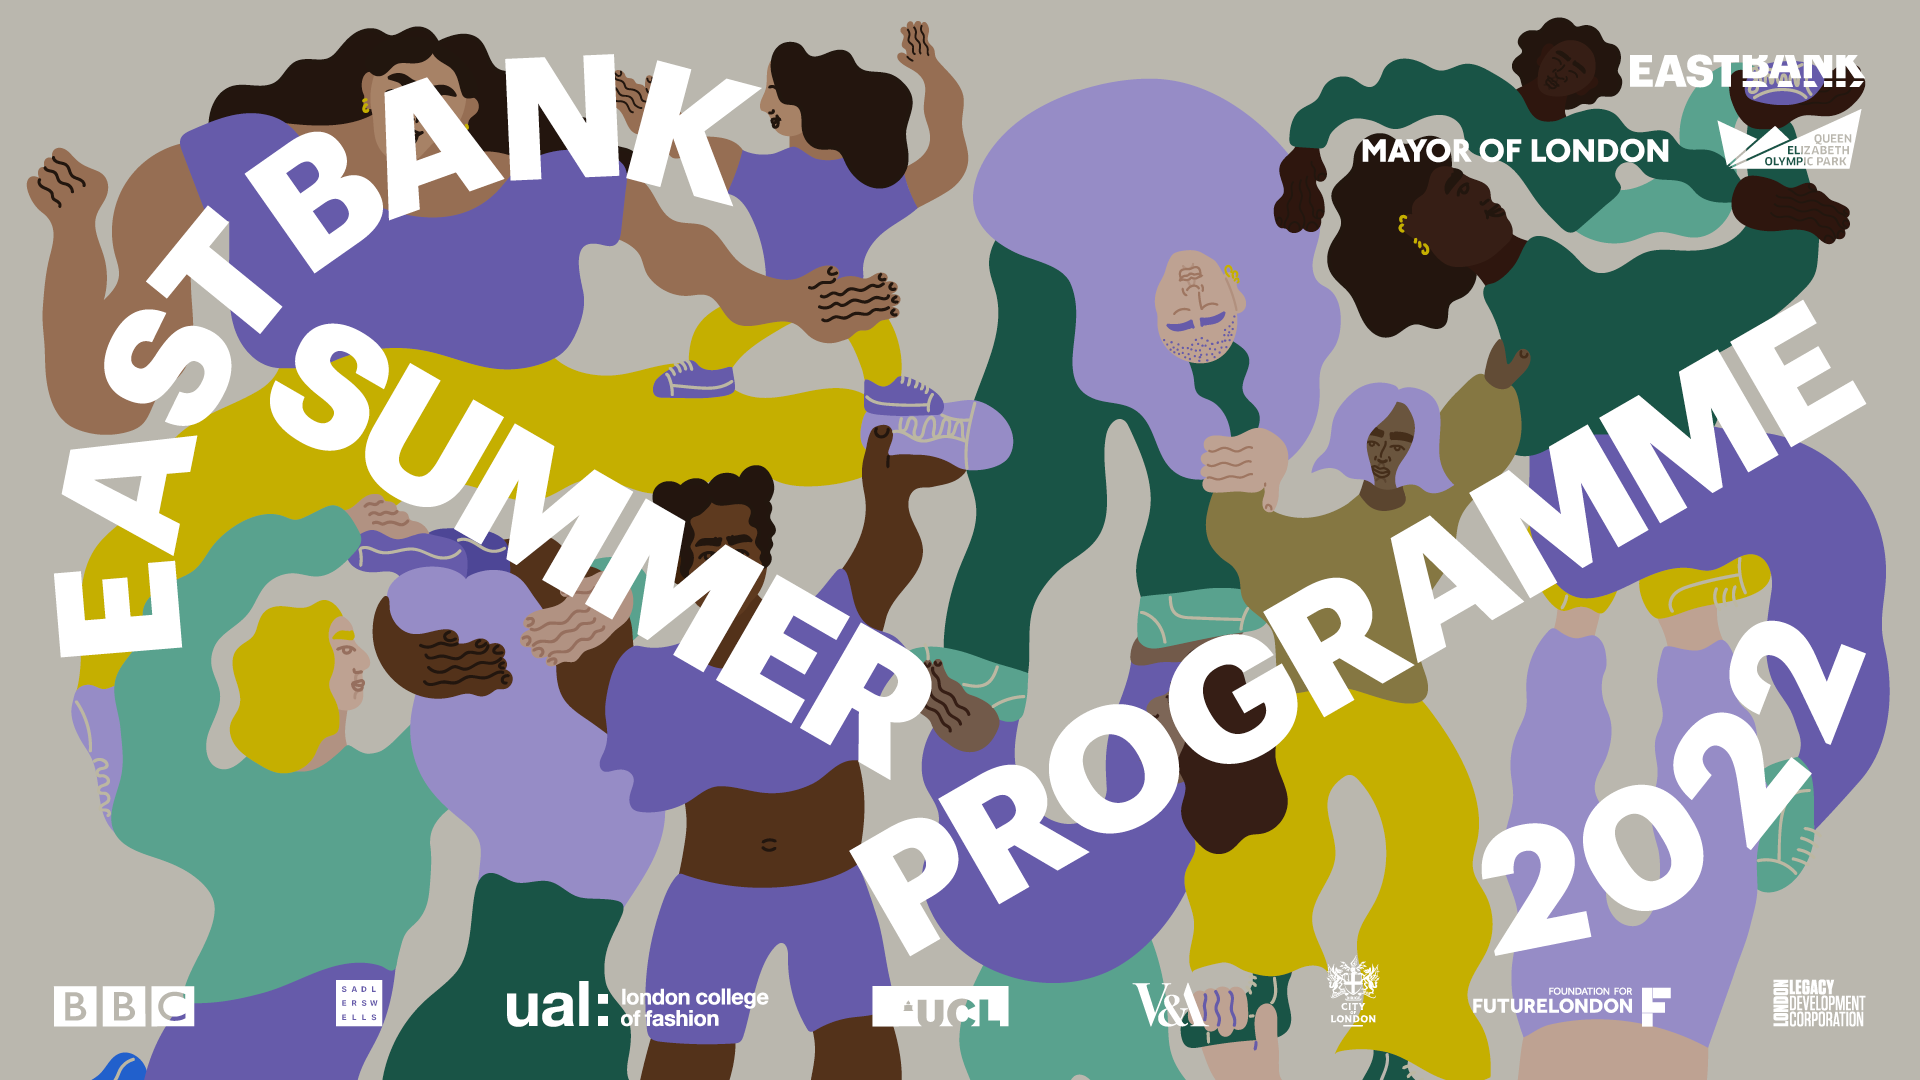 East Bank Summer Programme 2022. Illustration by Erin Aniker and graphics by Mohammed Samad.